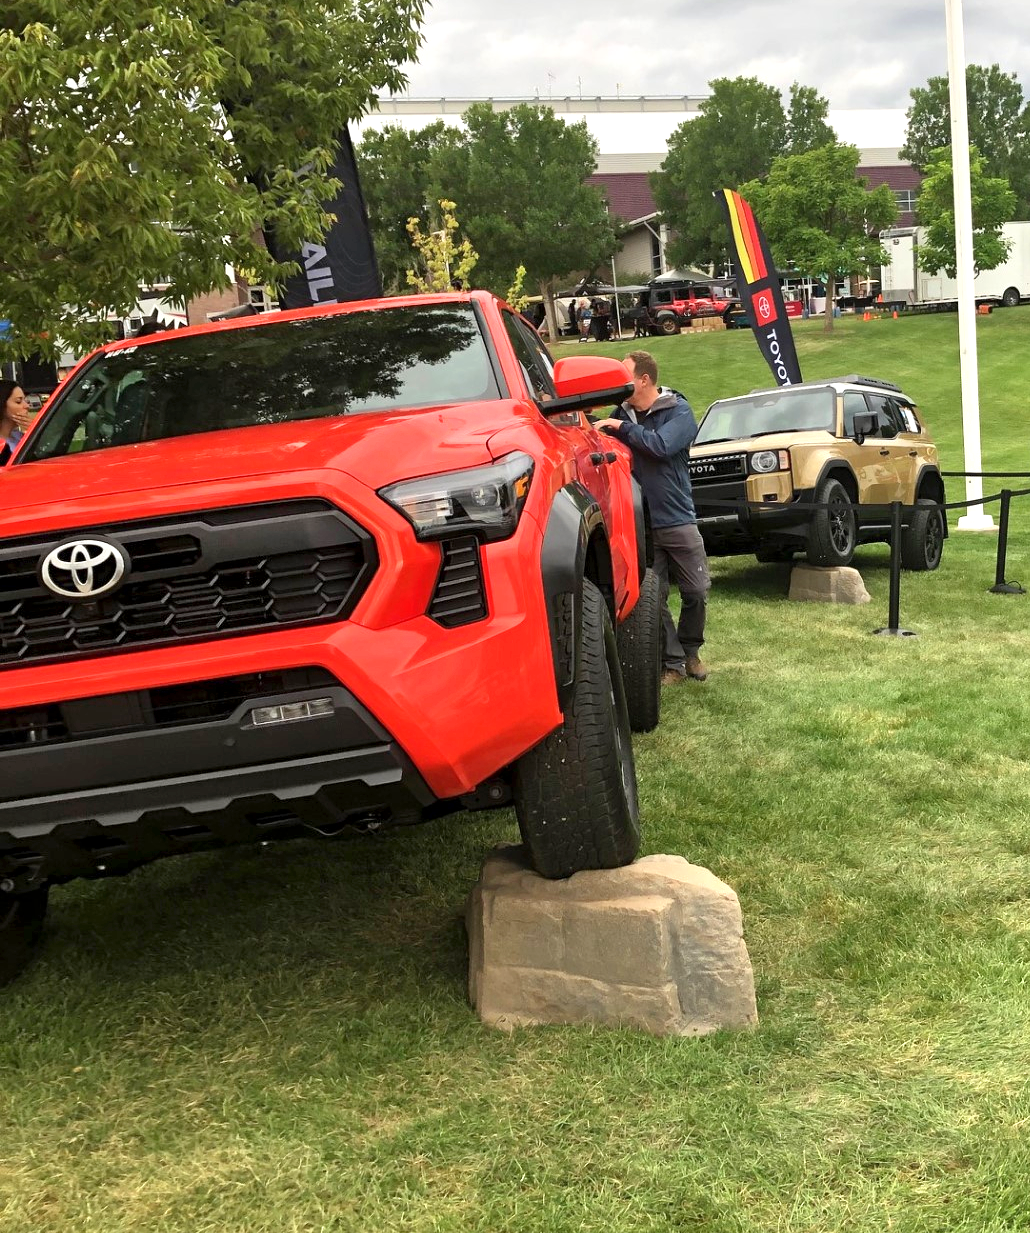 2024 Tacoma 2024 Tacoma TRD Off-Road has first official public reveal @ Overland Expo! [Videos + Photos] 1693142025575